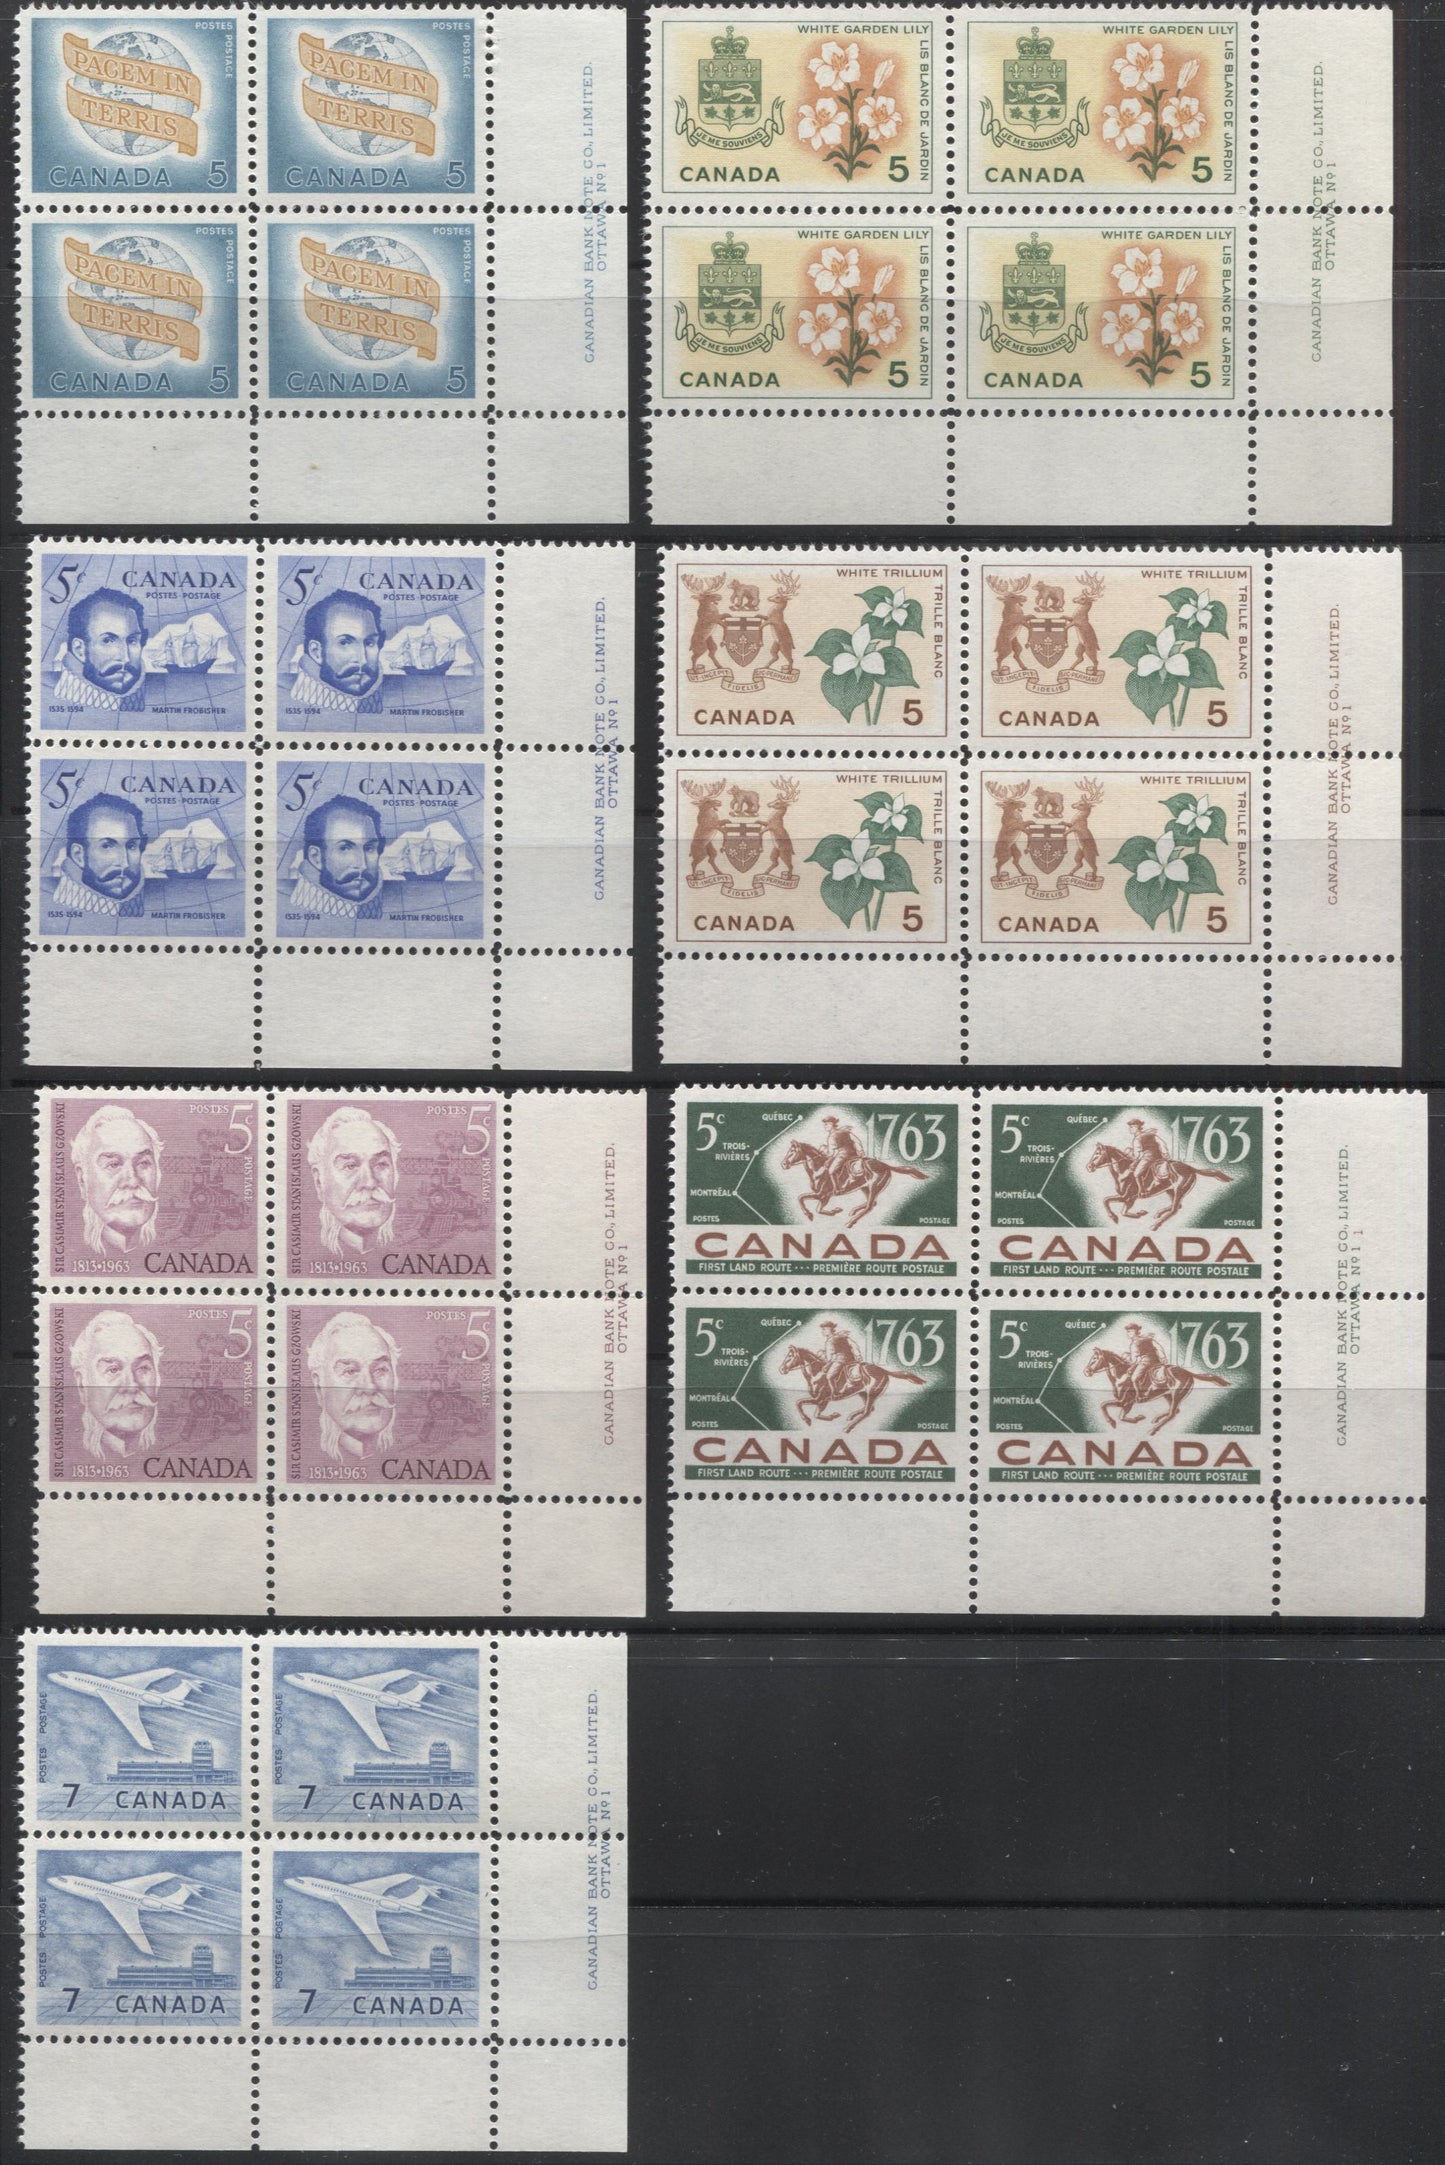 Lot 13 Canada #410, 412-414, 416-420 5c & 7c Rose Lilac - Blue Sir Casimir Gzowski - Jet Plane, 1963-1966 Commemoratives & Definitives, 9 VFNH UL Plate 1 Blocks Of 4, 417 With Fluorescent Ink